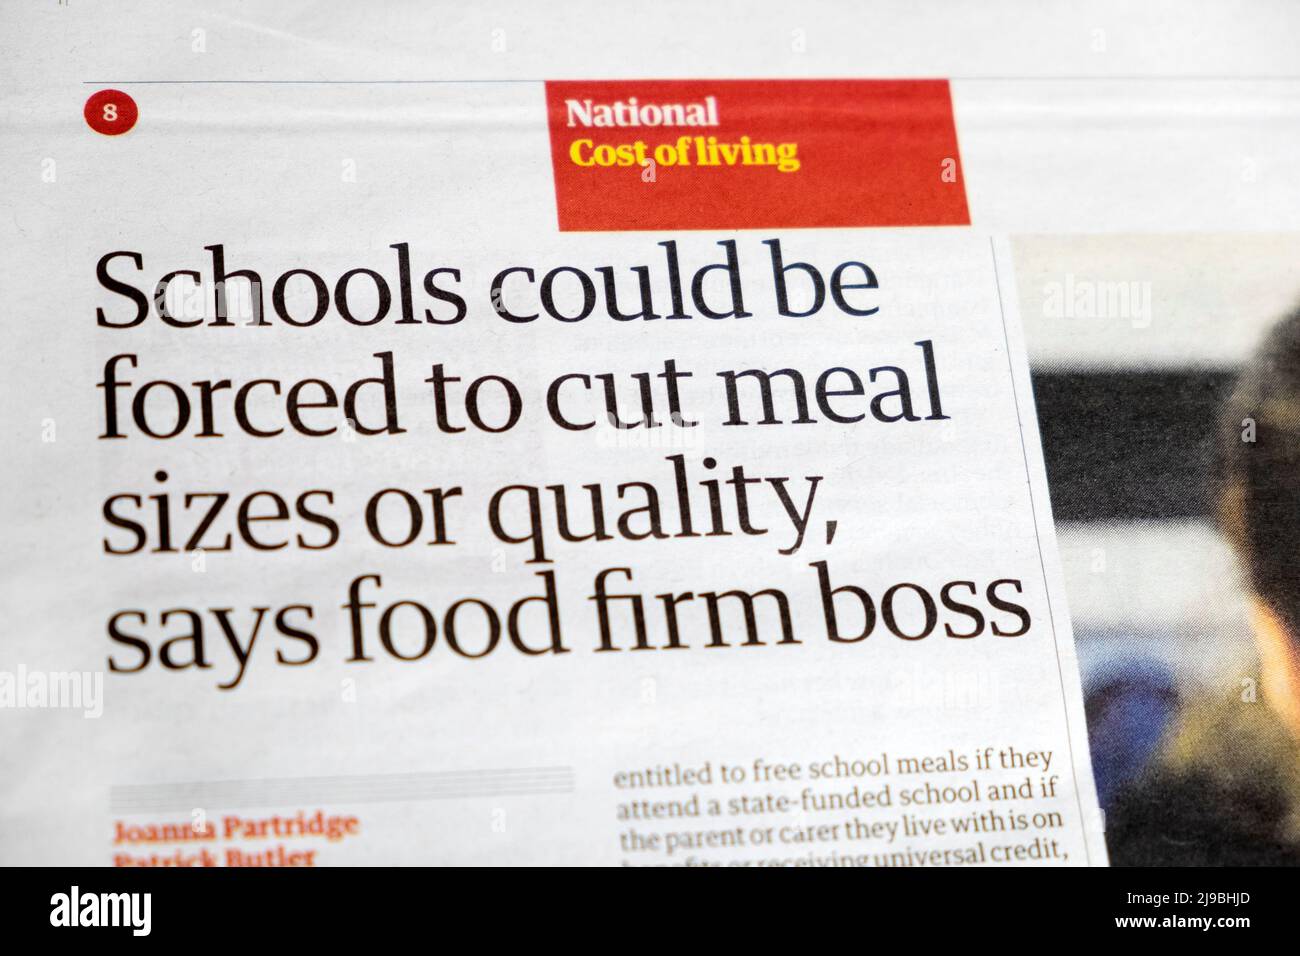 'Schools could be forced to cut meal sizes or quality, says food firm boss' Guardian newspaper headline cost of living clipping 18 May 2022 London UK Stock Photo